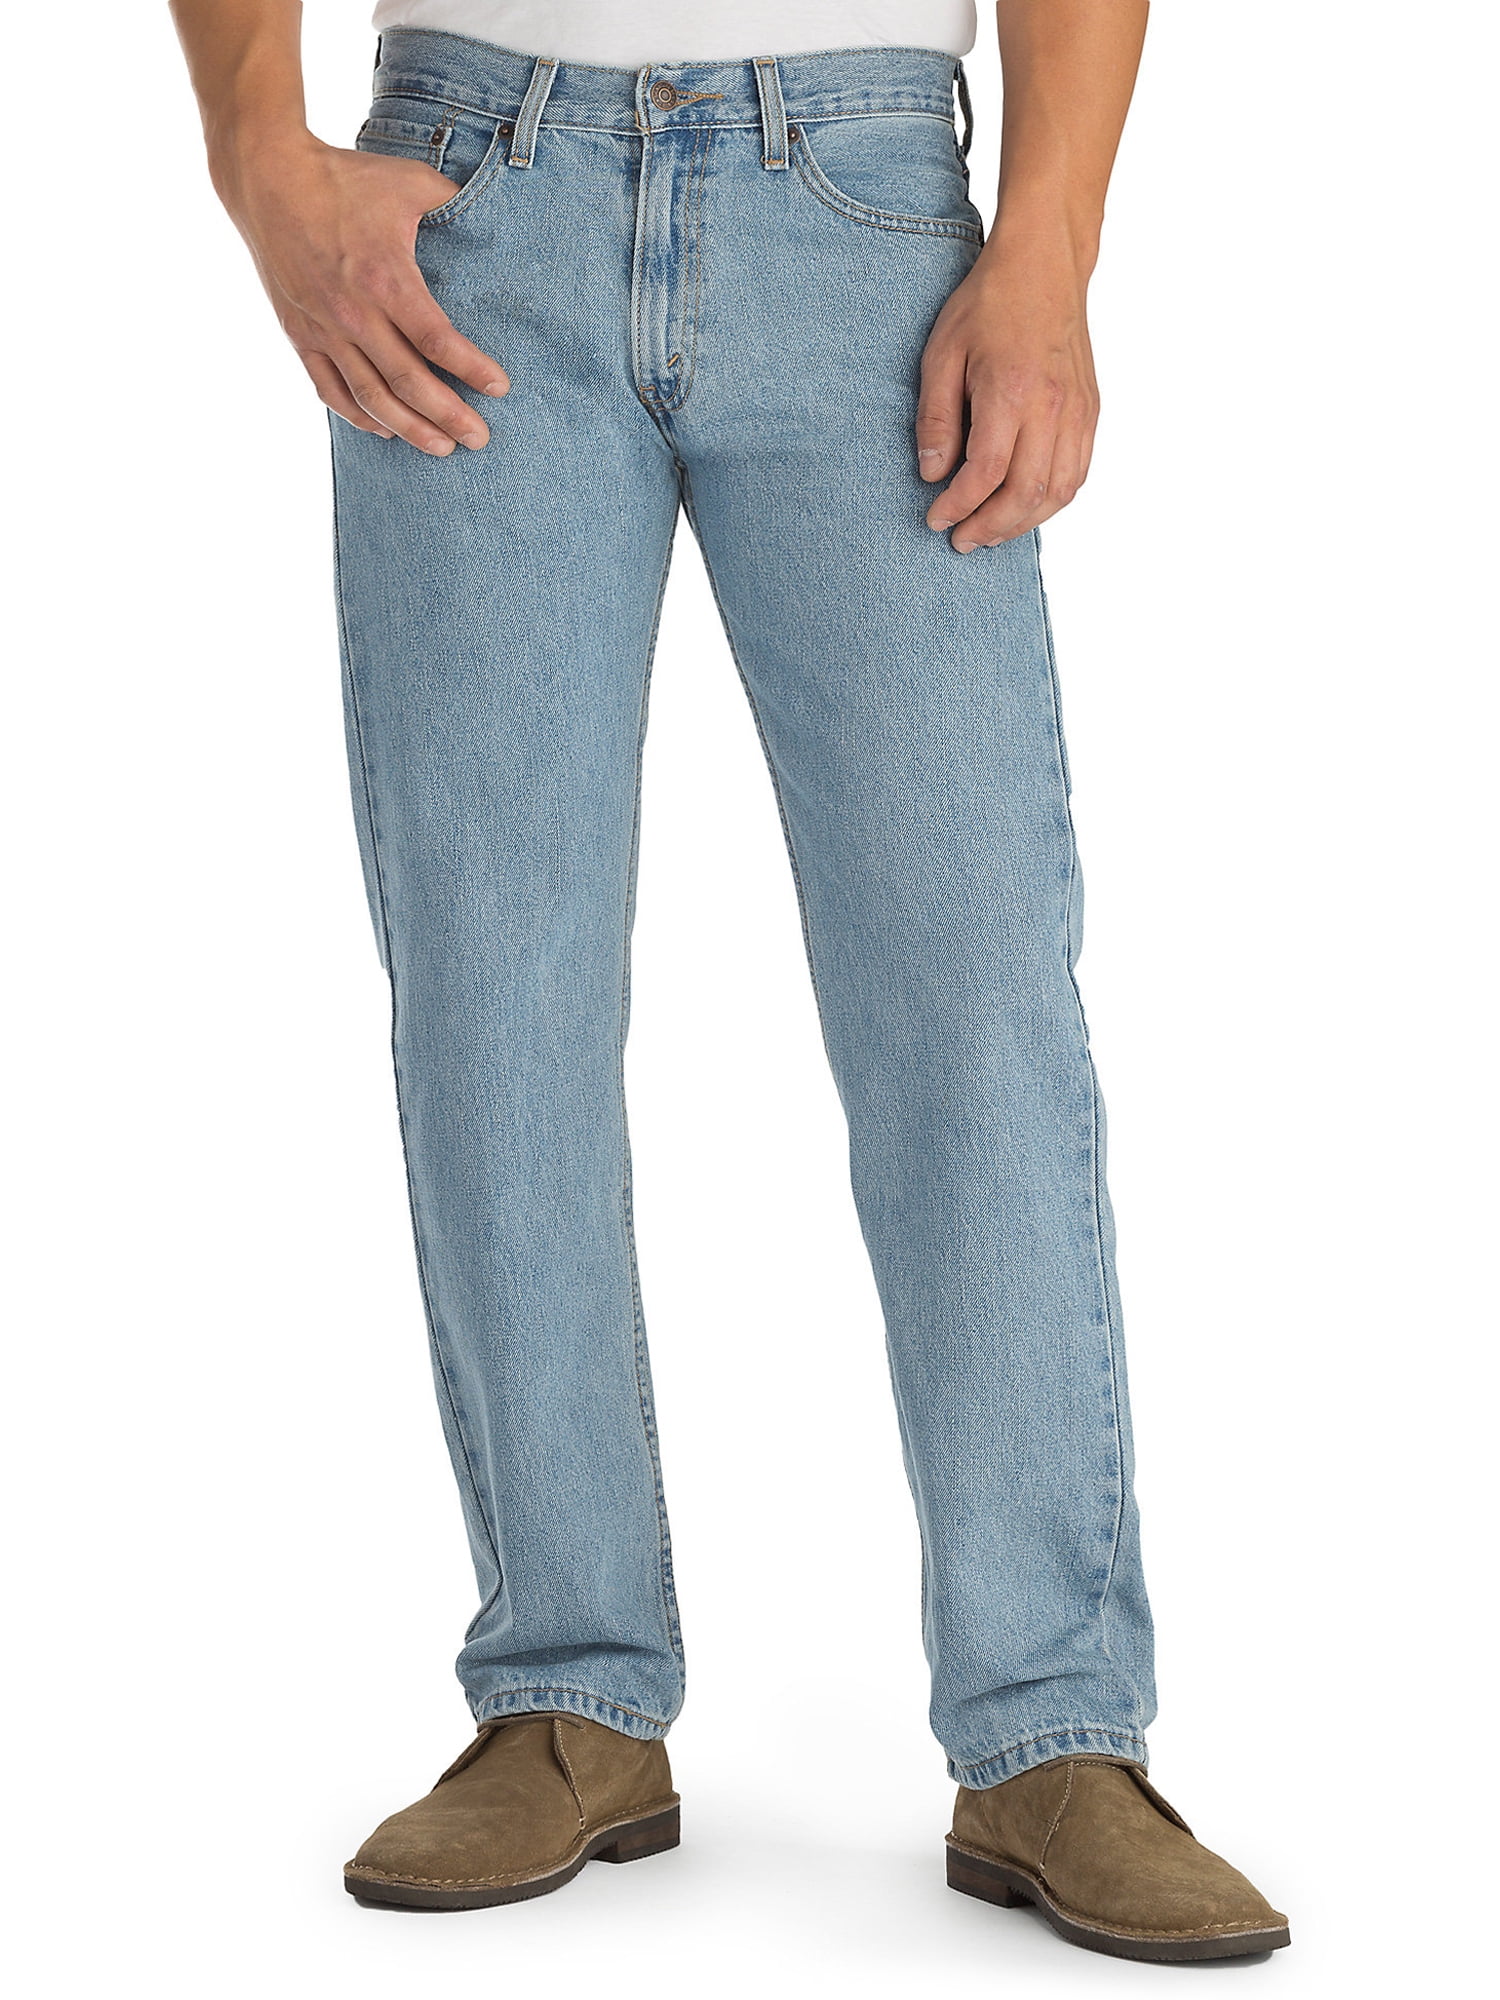 Signature by Levi Strauss & Co. Men's and Big Men's Regular Fit Jeans -  